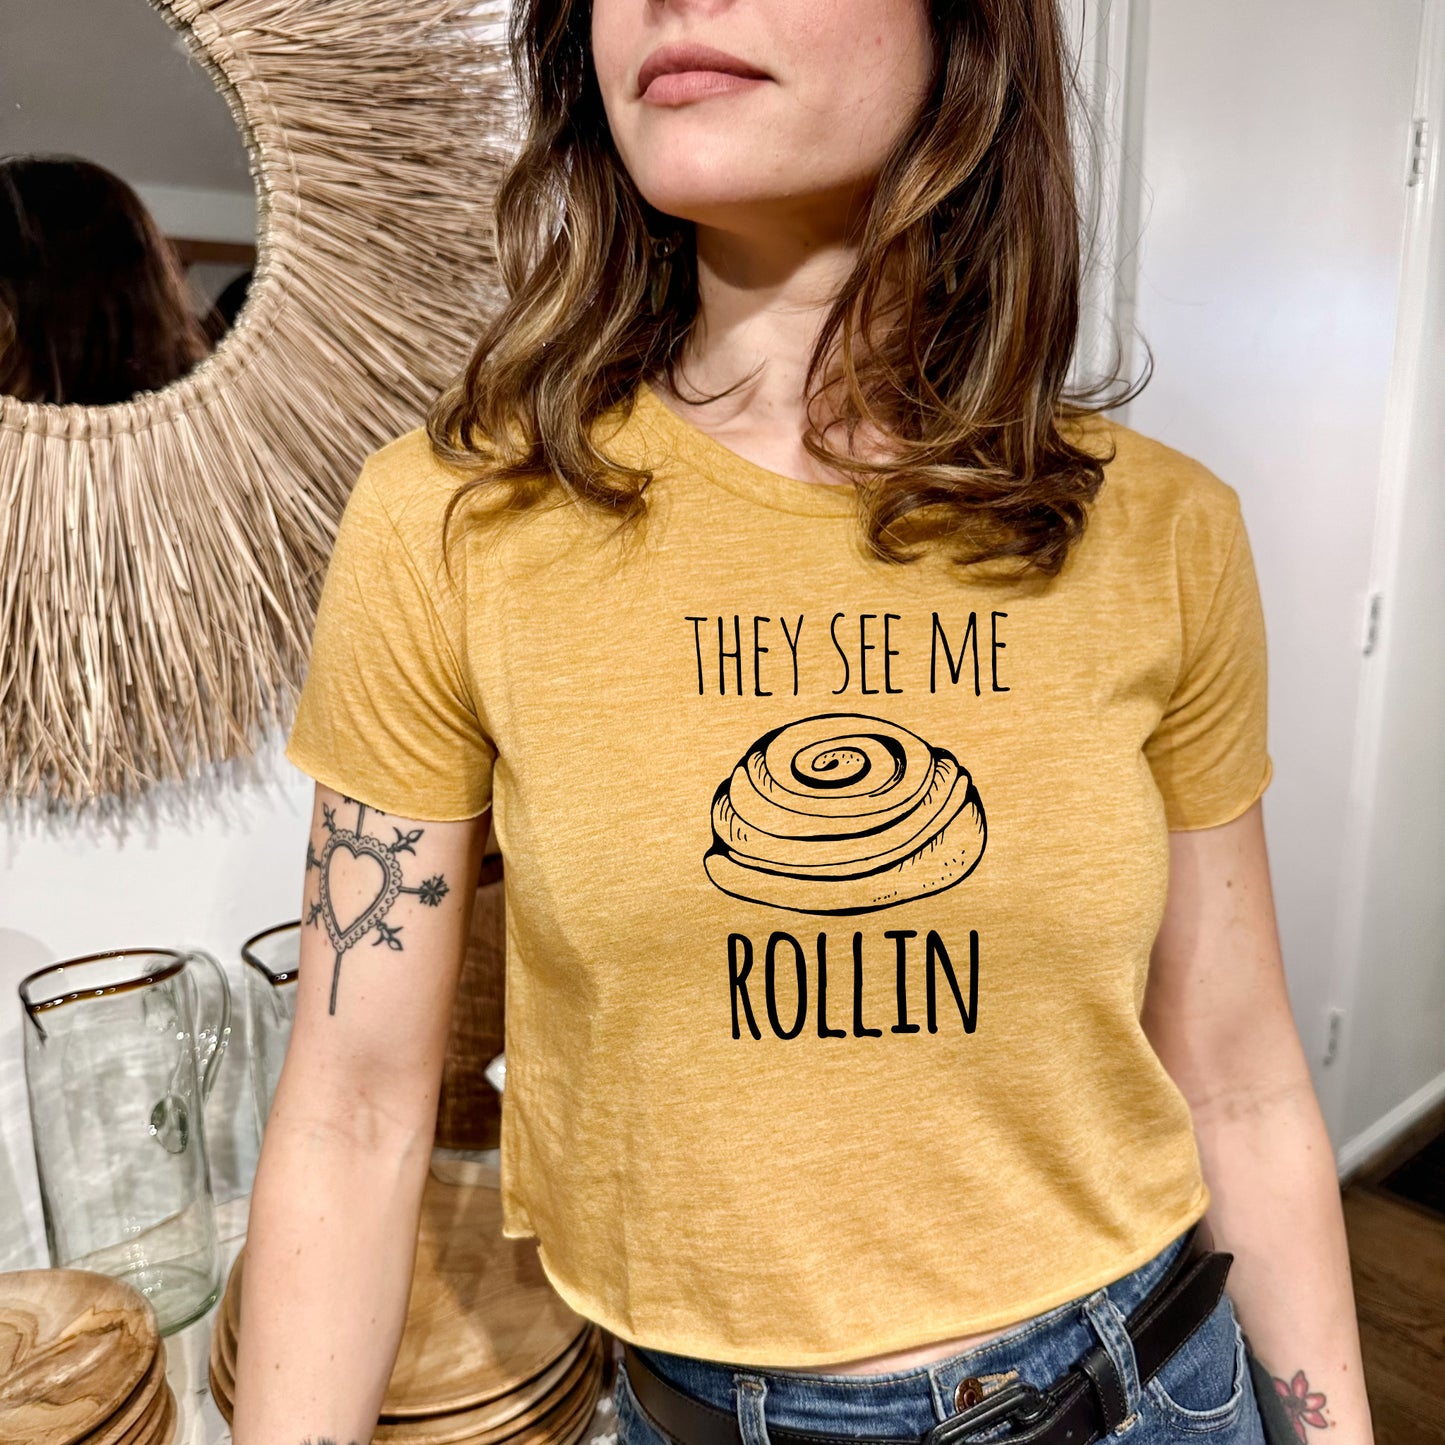 They See Me Rollin' (Cinnamon Roll) - Women's Crop Tee - Heather Gray or Gold